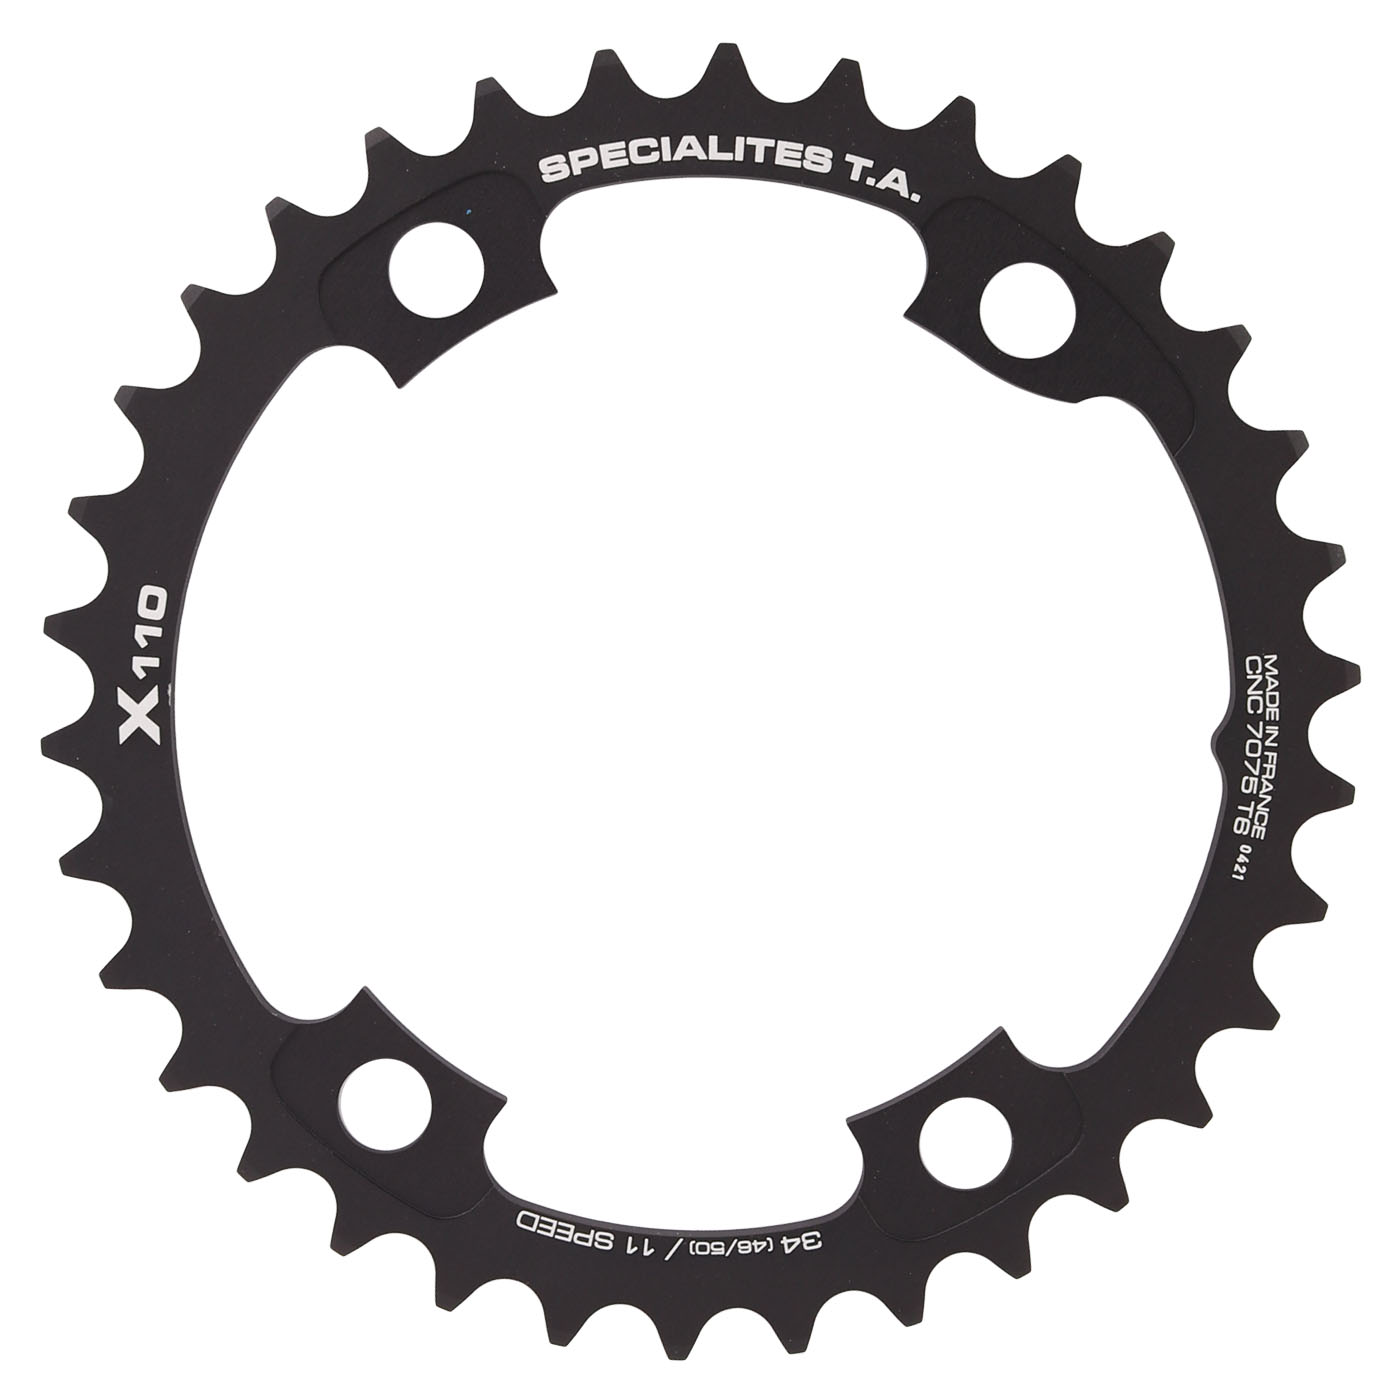 Productfoto van TA Specialites X110 Chainring 110mm for 4-Arm